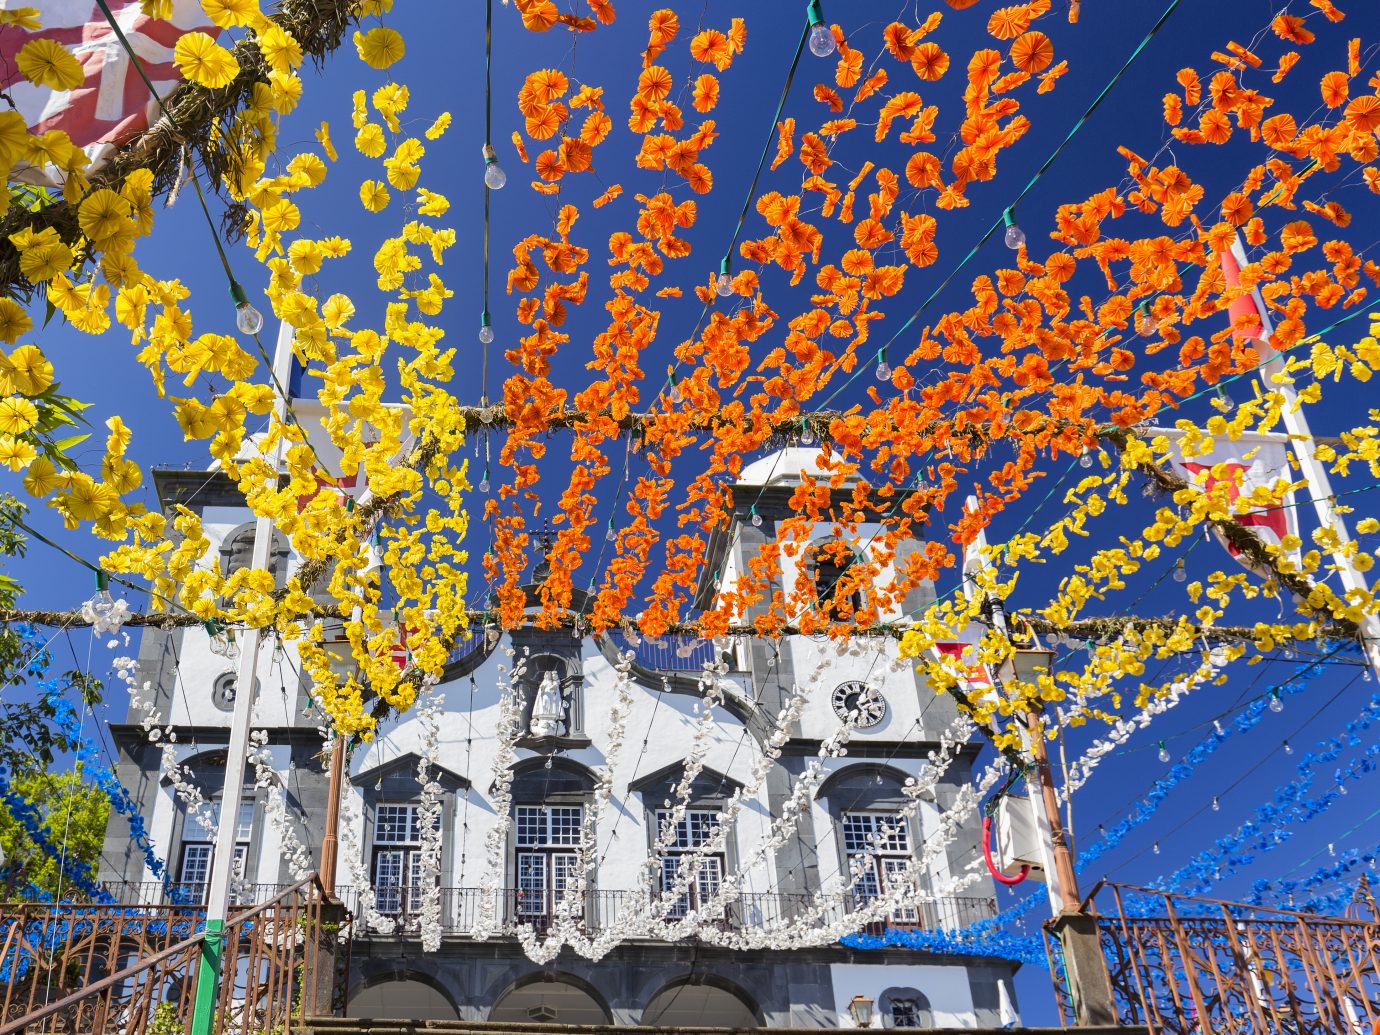 Decorate yellow, orange, blue and white flowers strung up leading to the Church of our Lady of Monte in Funchal, Portugal.